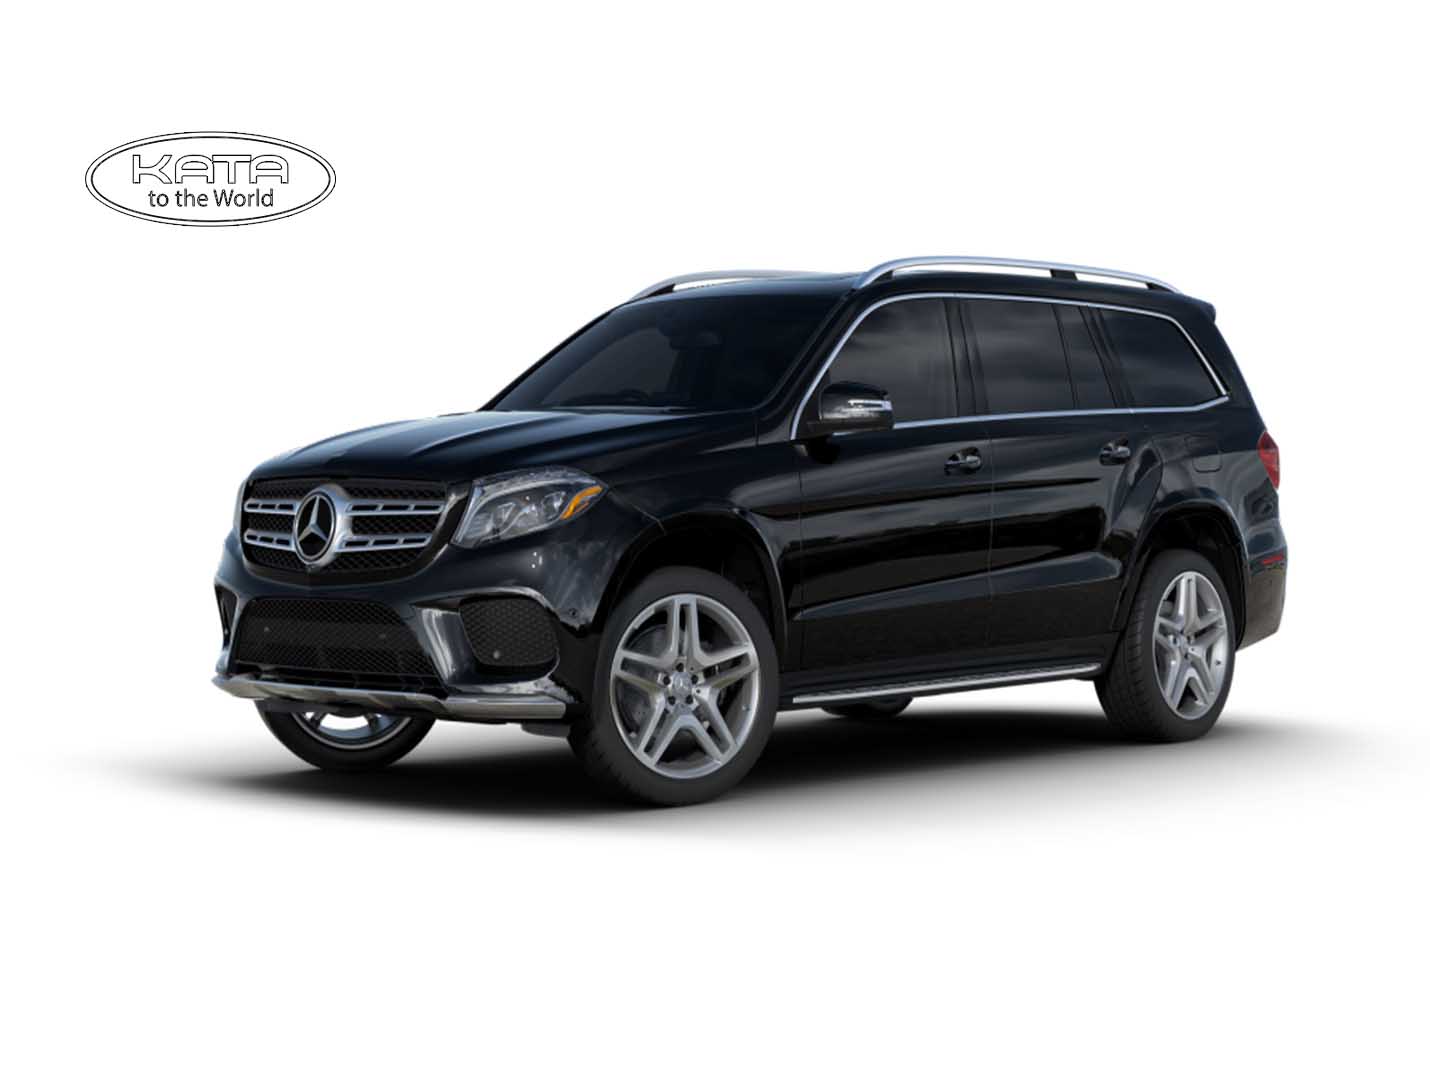 Mercedes GL550 Review